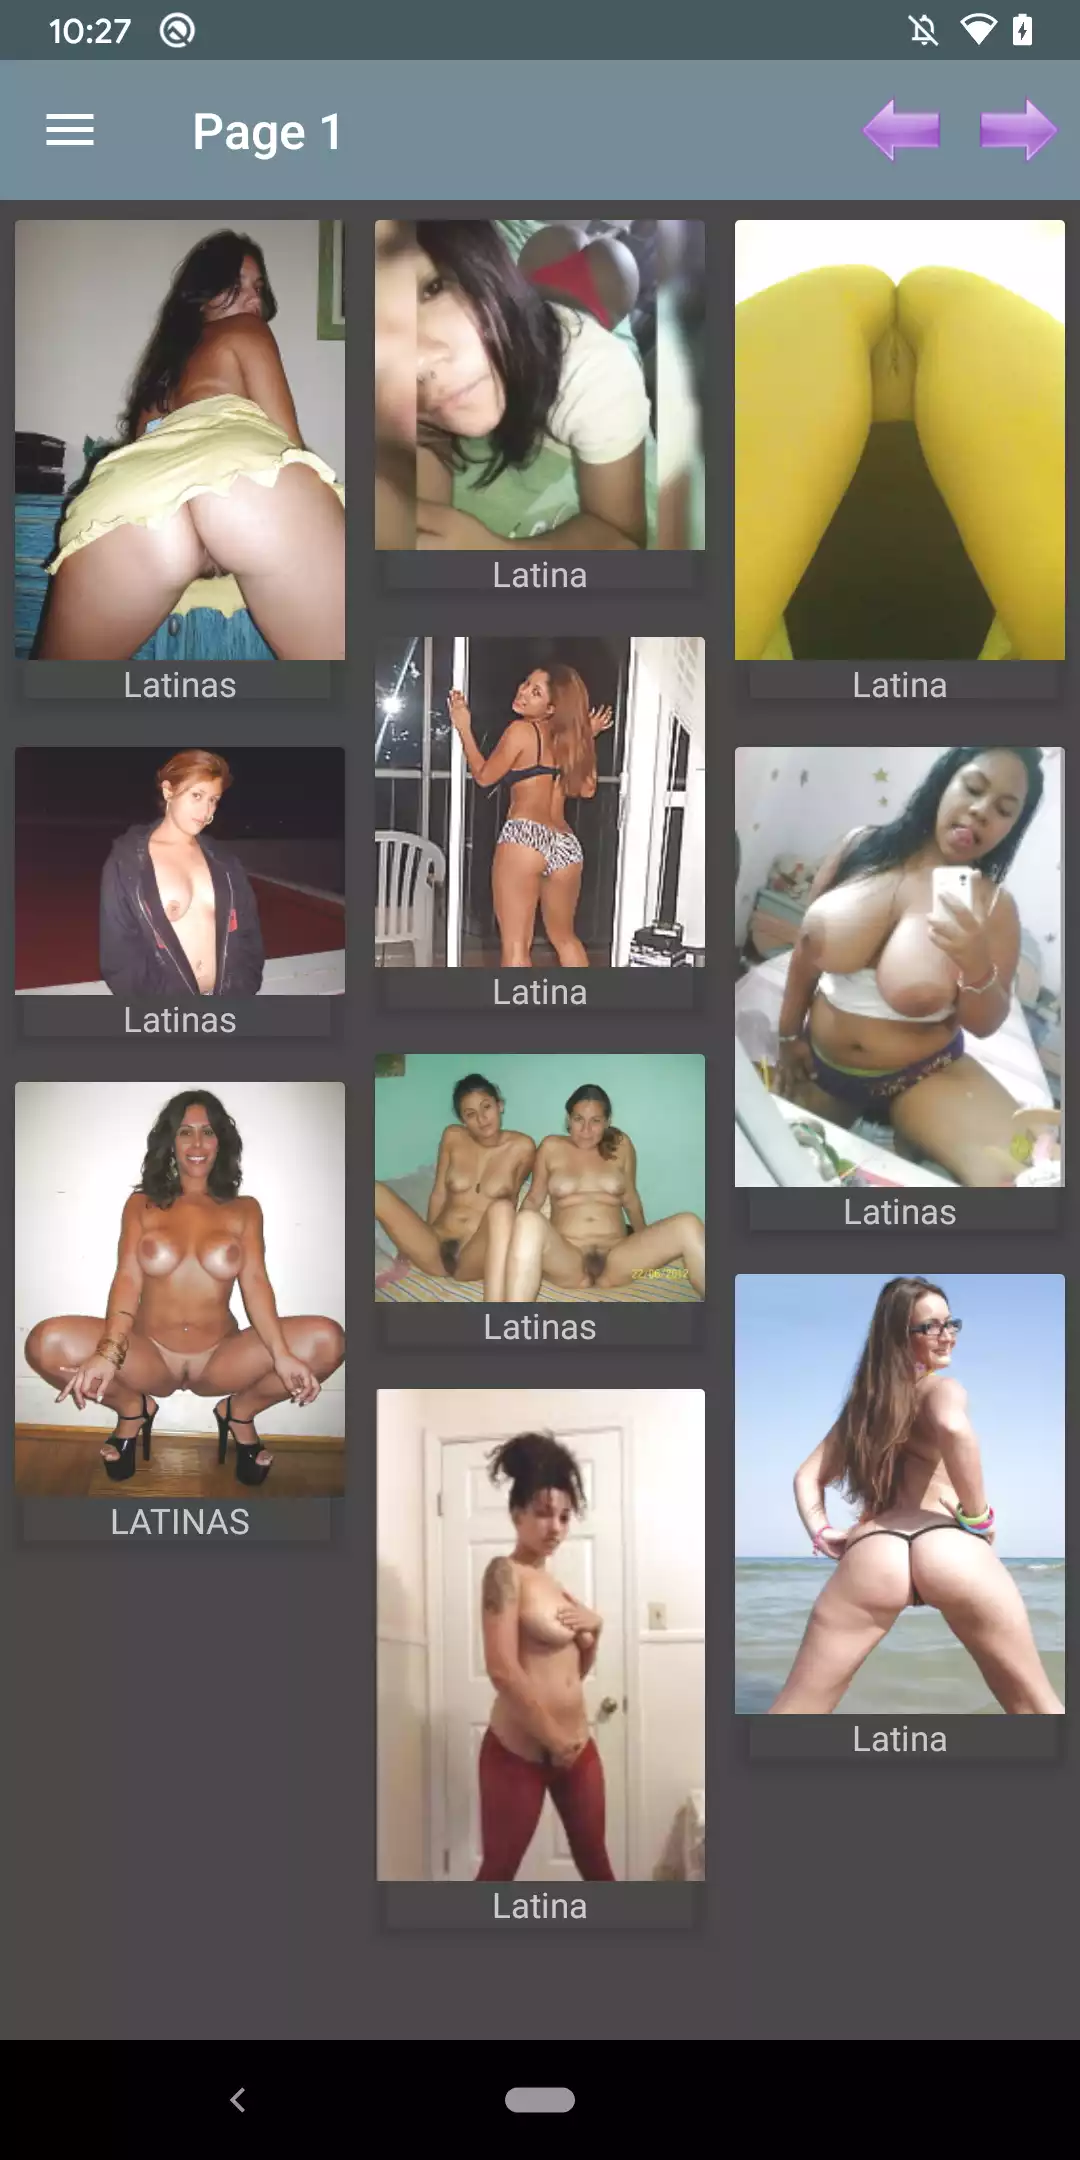 Latina Pics hot,dance,brasil,eroticwallpapers,hentai,offline,image,sexy,heantai,anime,henti,apps,porn,galleries,for,mexican,apk,pictures,latina,pornstars,pics,hintai,android,hentail